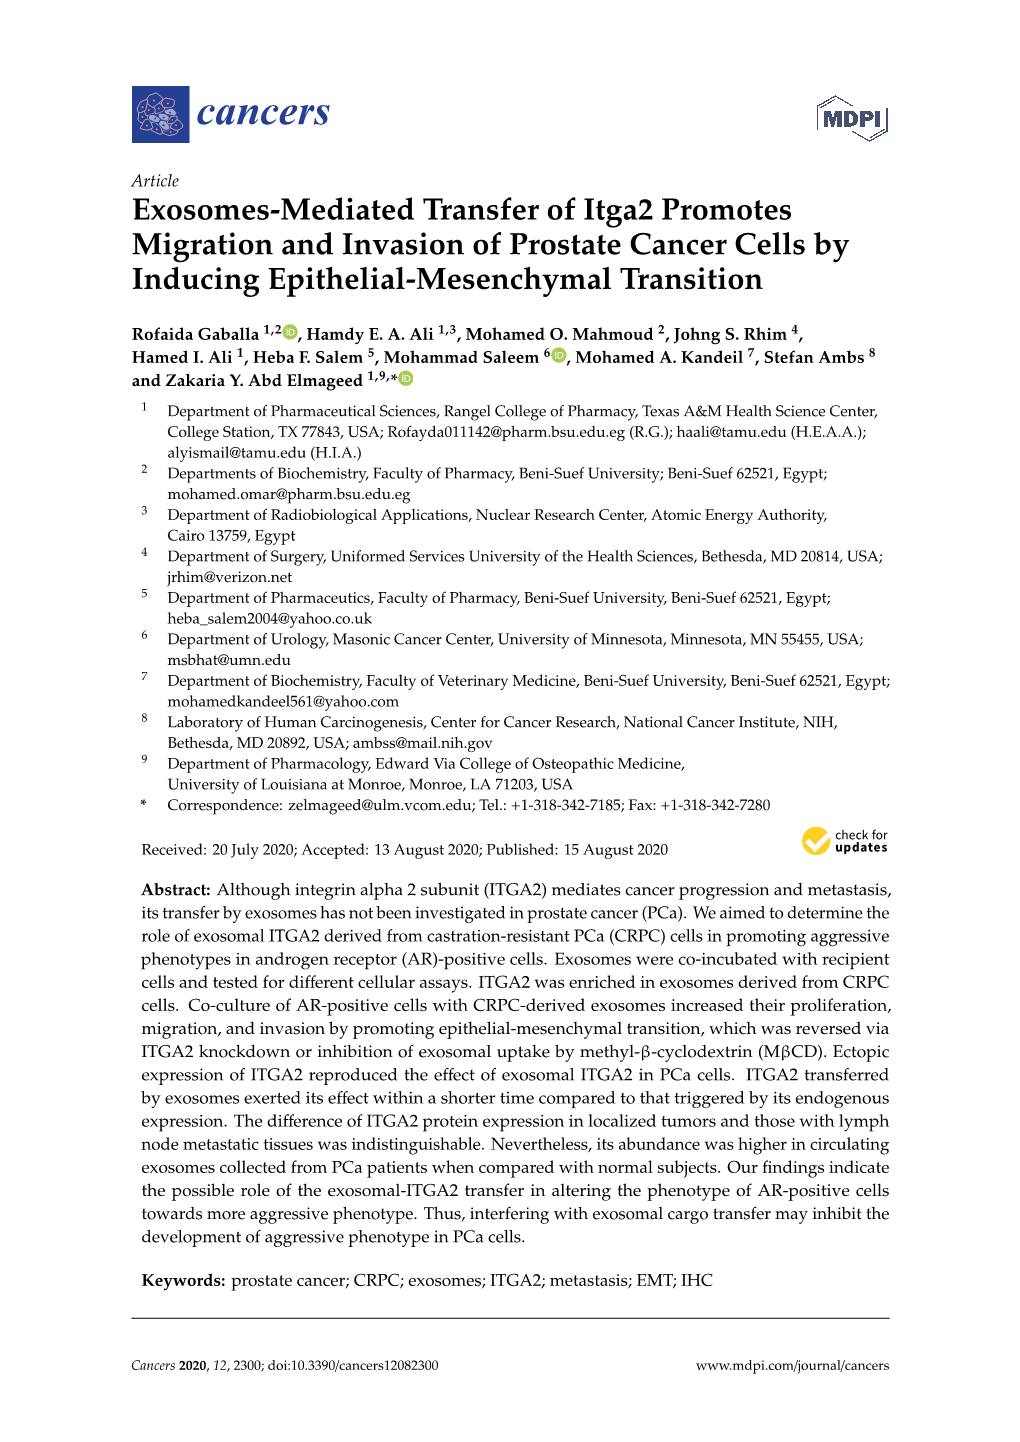 Exosomes-Mediated Transfer of Itga2 Promotes Migration and Invasion of Prostate Cancer Cells by Inducing Epithelial-Mesenchymal Transition